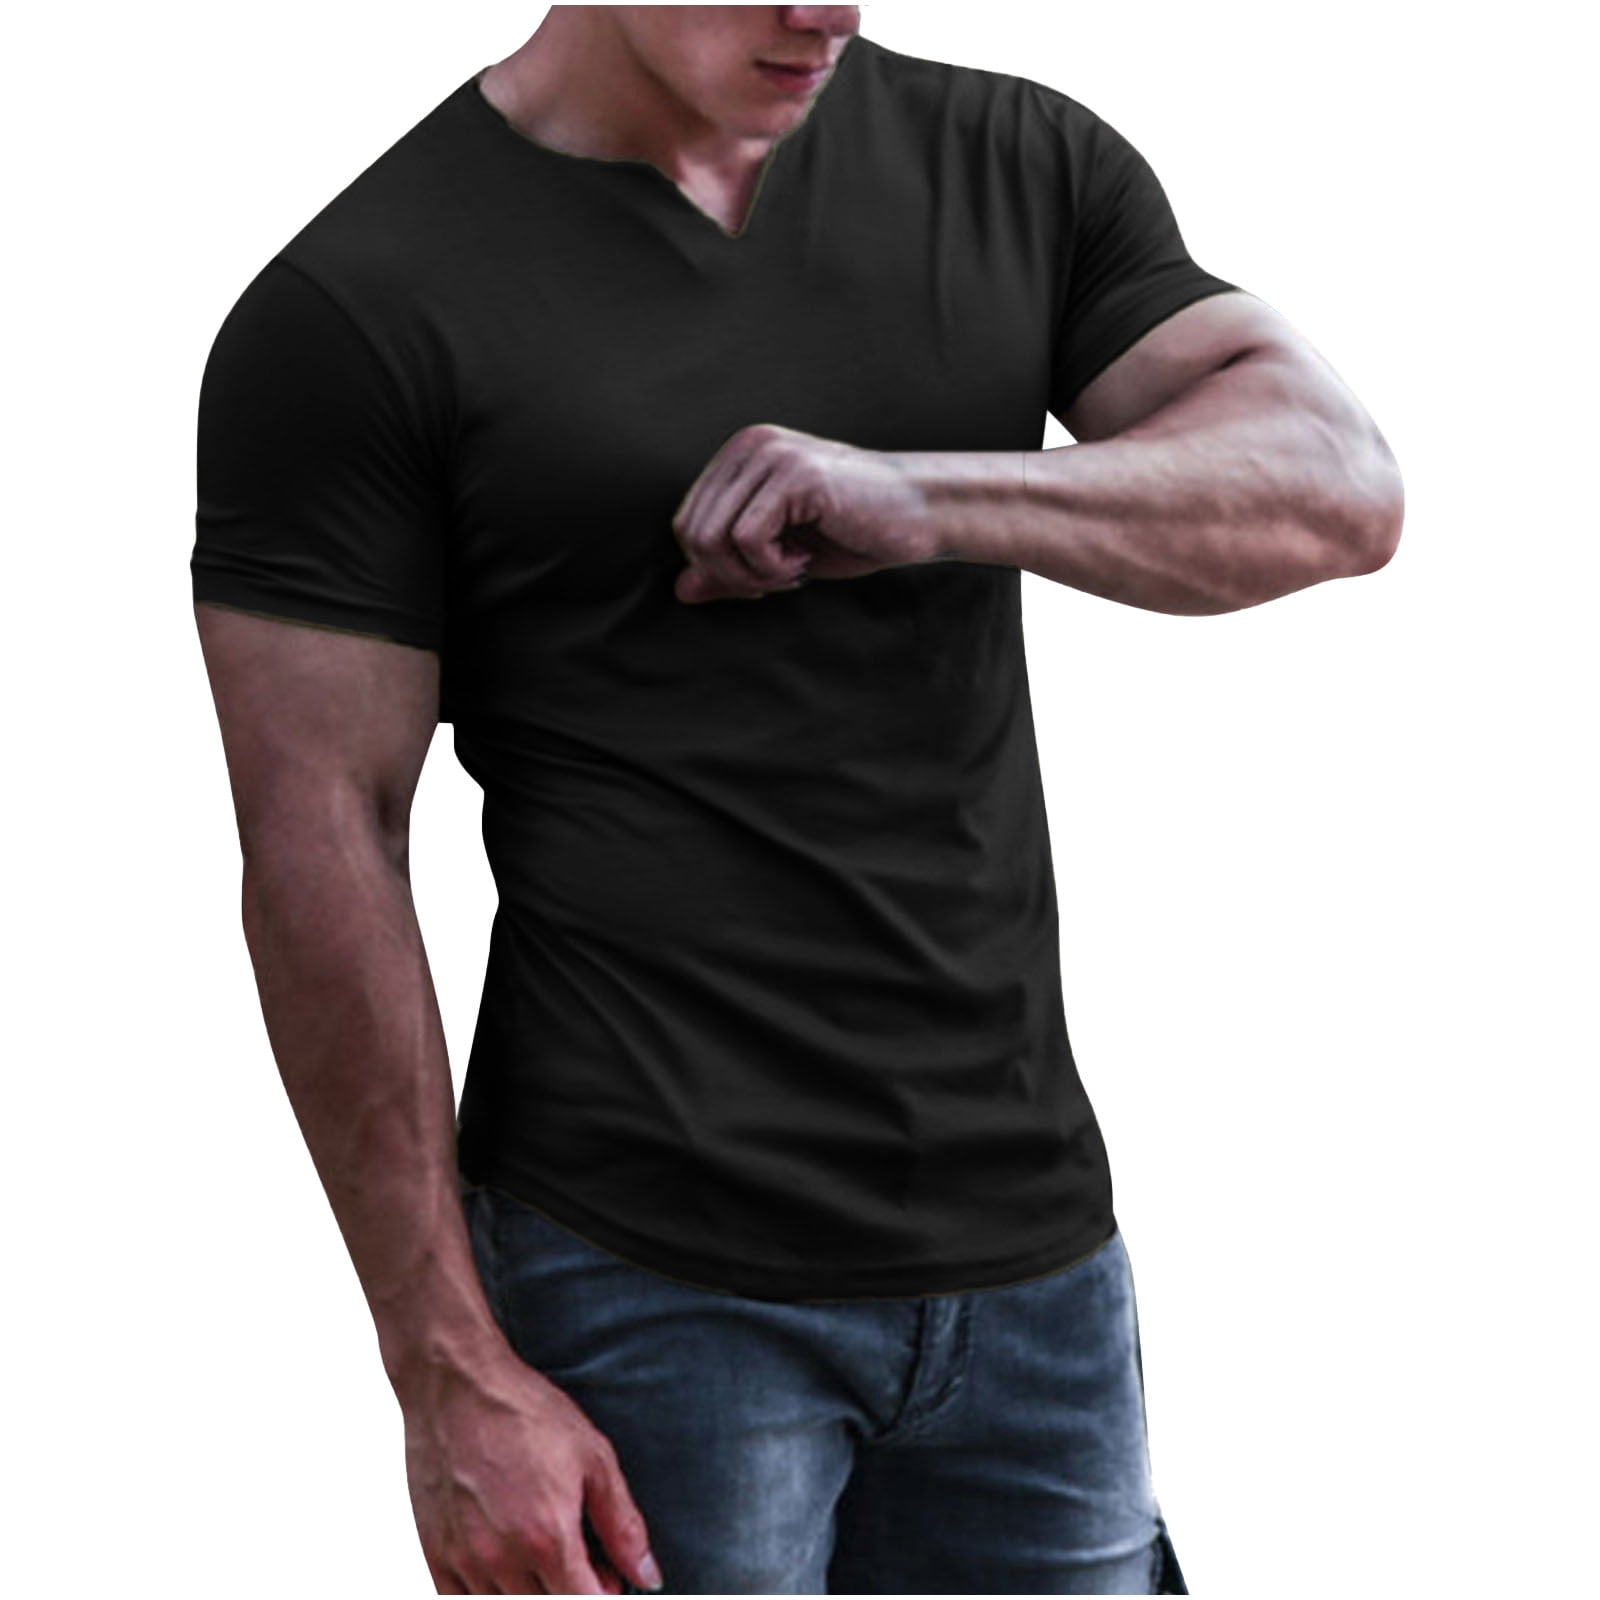 HAPIMO Solid Color Blouse V-Neck Fashion Tops Short Sleeve T-Shirt for Men  Casual Slim Fit Bottoming Tee Clothes Men's Summer Sports Shirts Black XL 